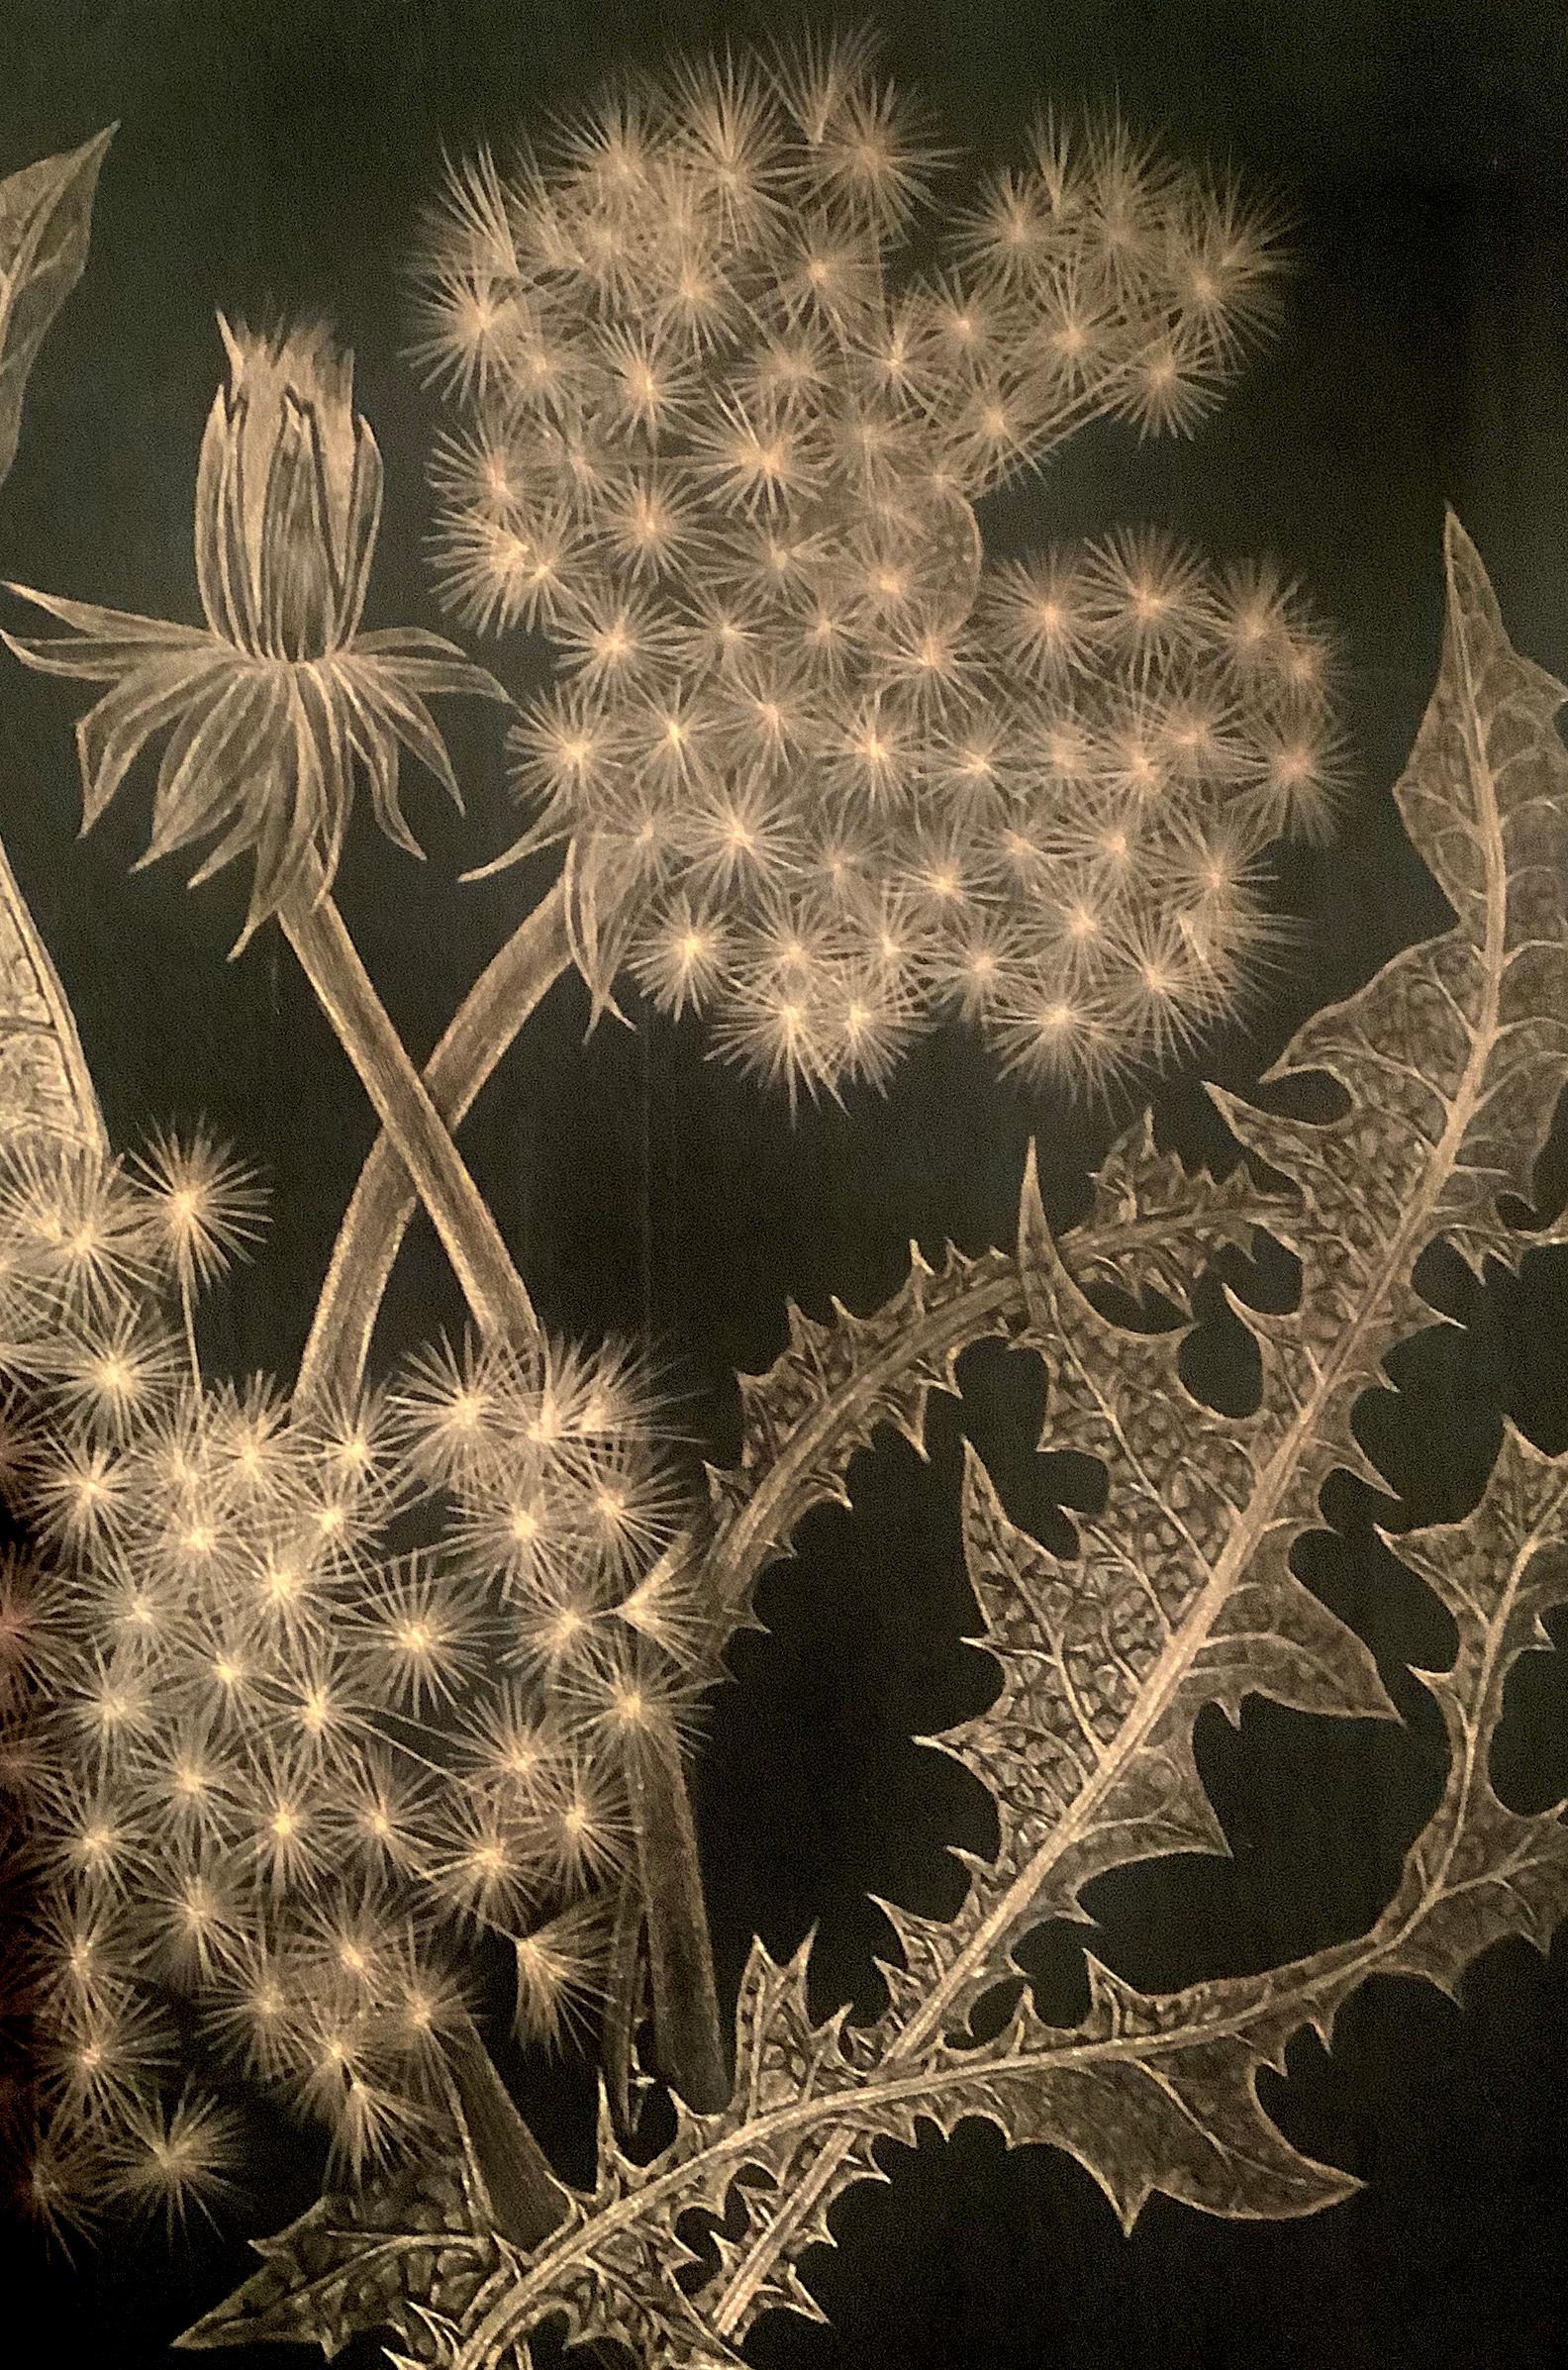 Dandelions with Bud, Small Botanical Drawing on Black Paper made with 14K Gold - Contemporary Art by Margot Glass